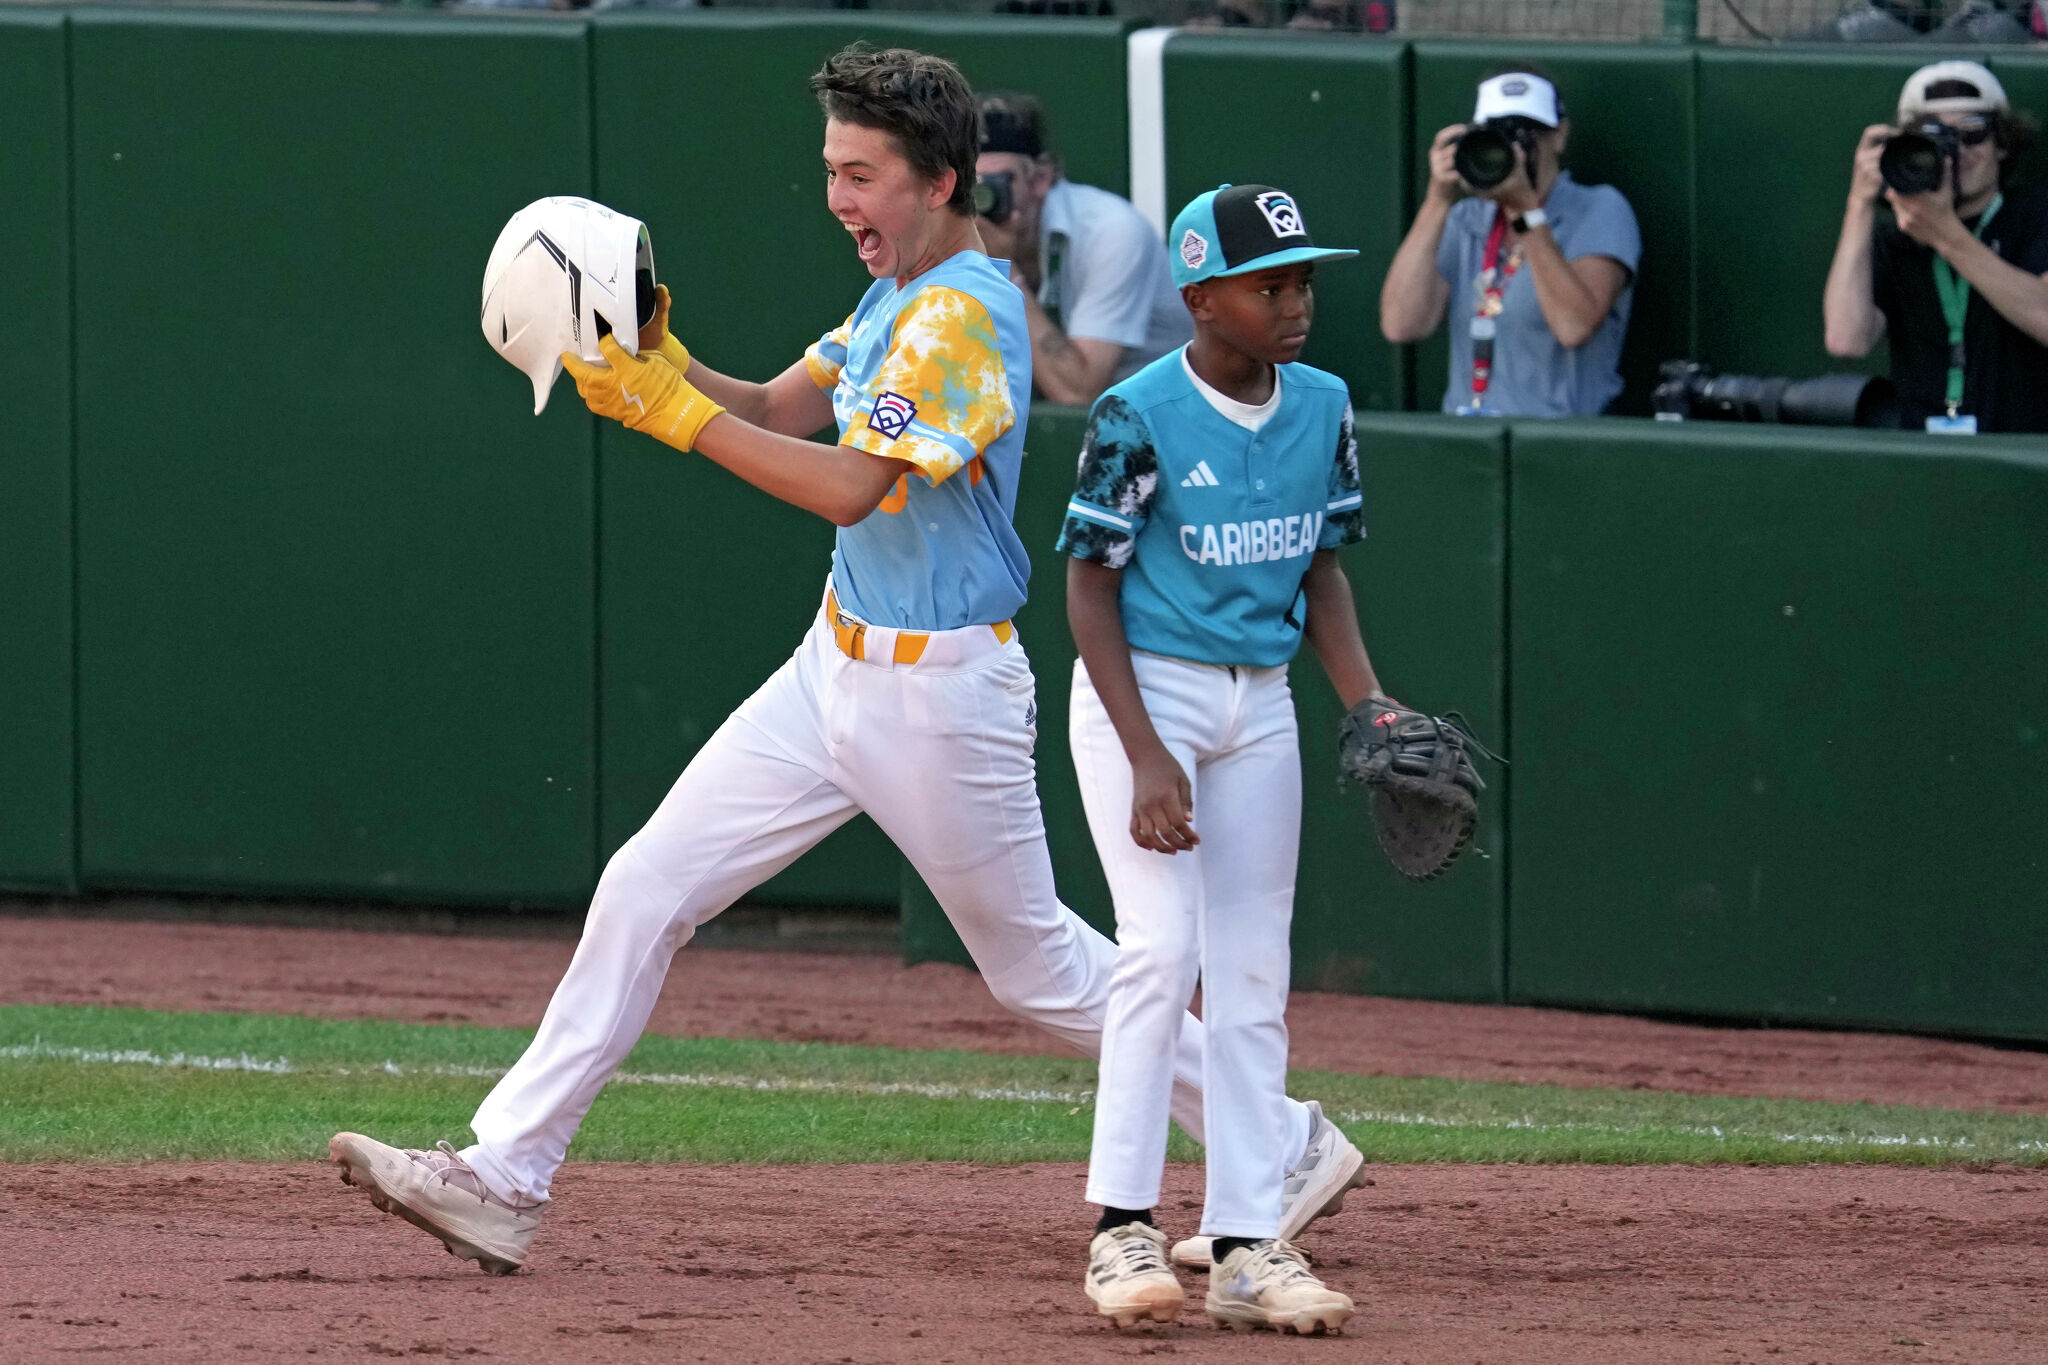 Little League World Series: Curacao and California to square off in the  final